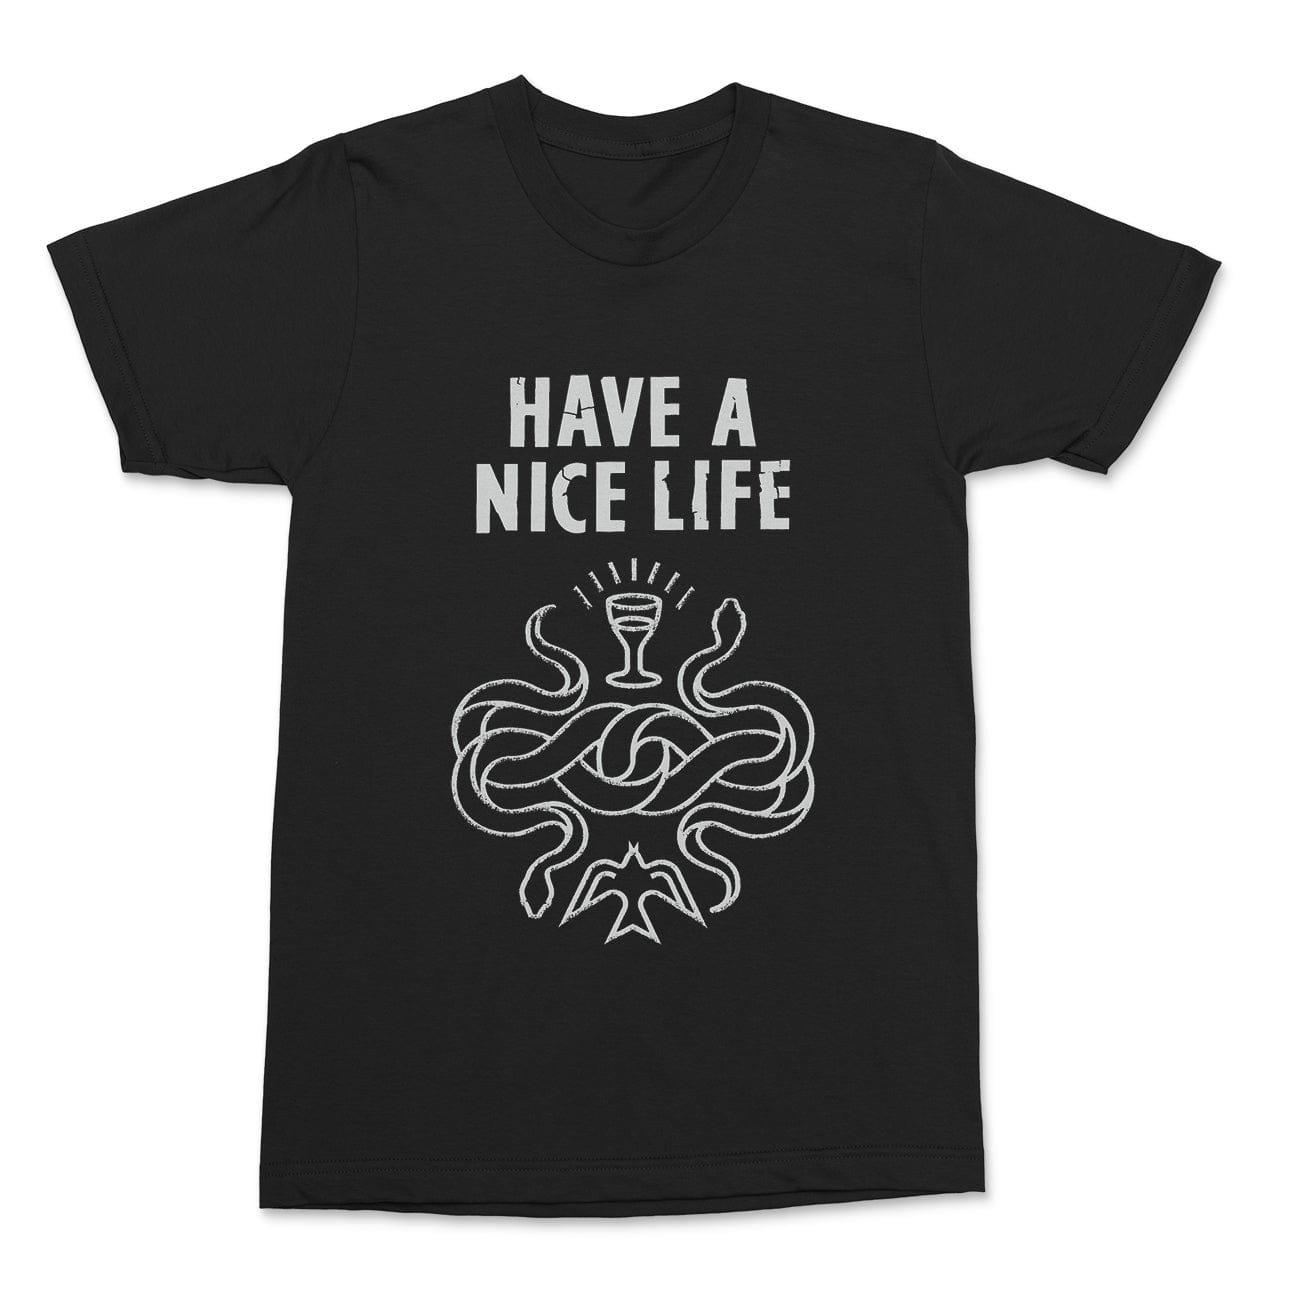 The Flenser Apparel Have a Nice Life "Twin Snakes" Shirt